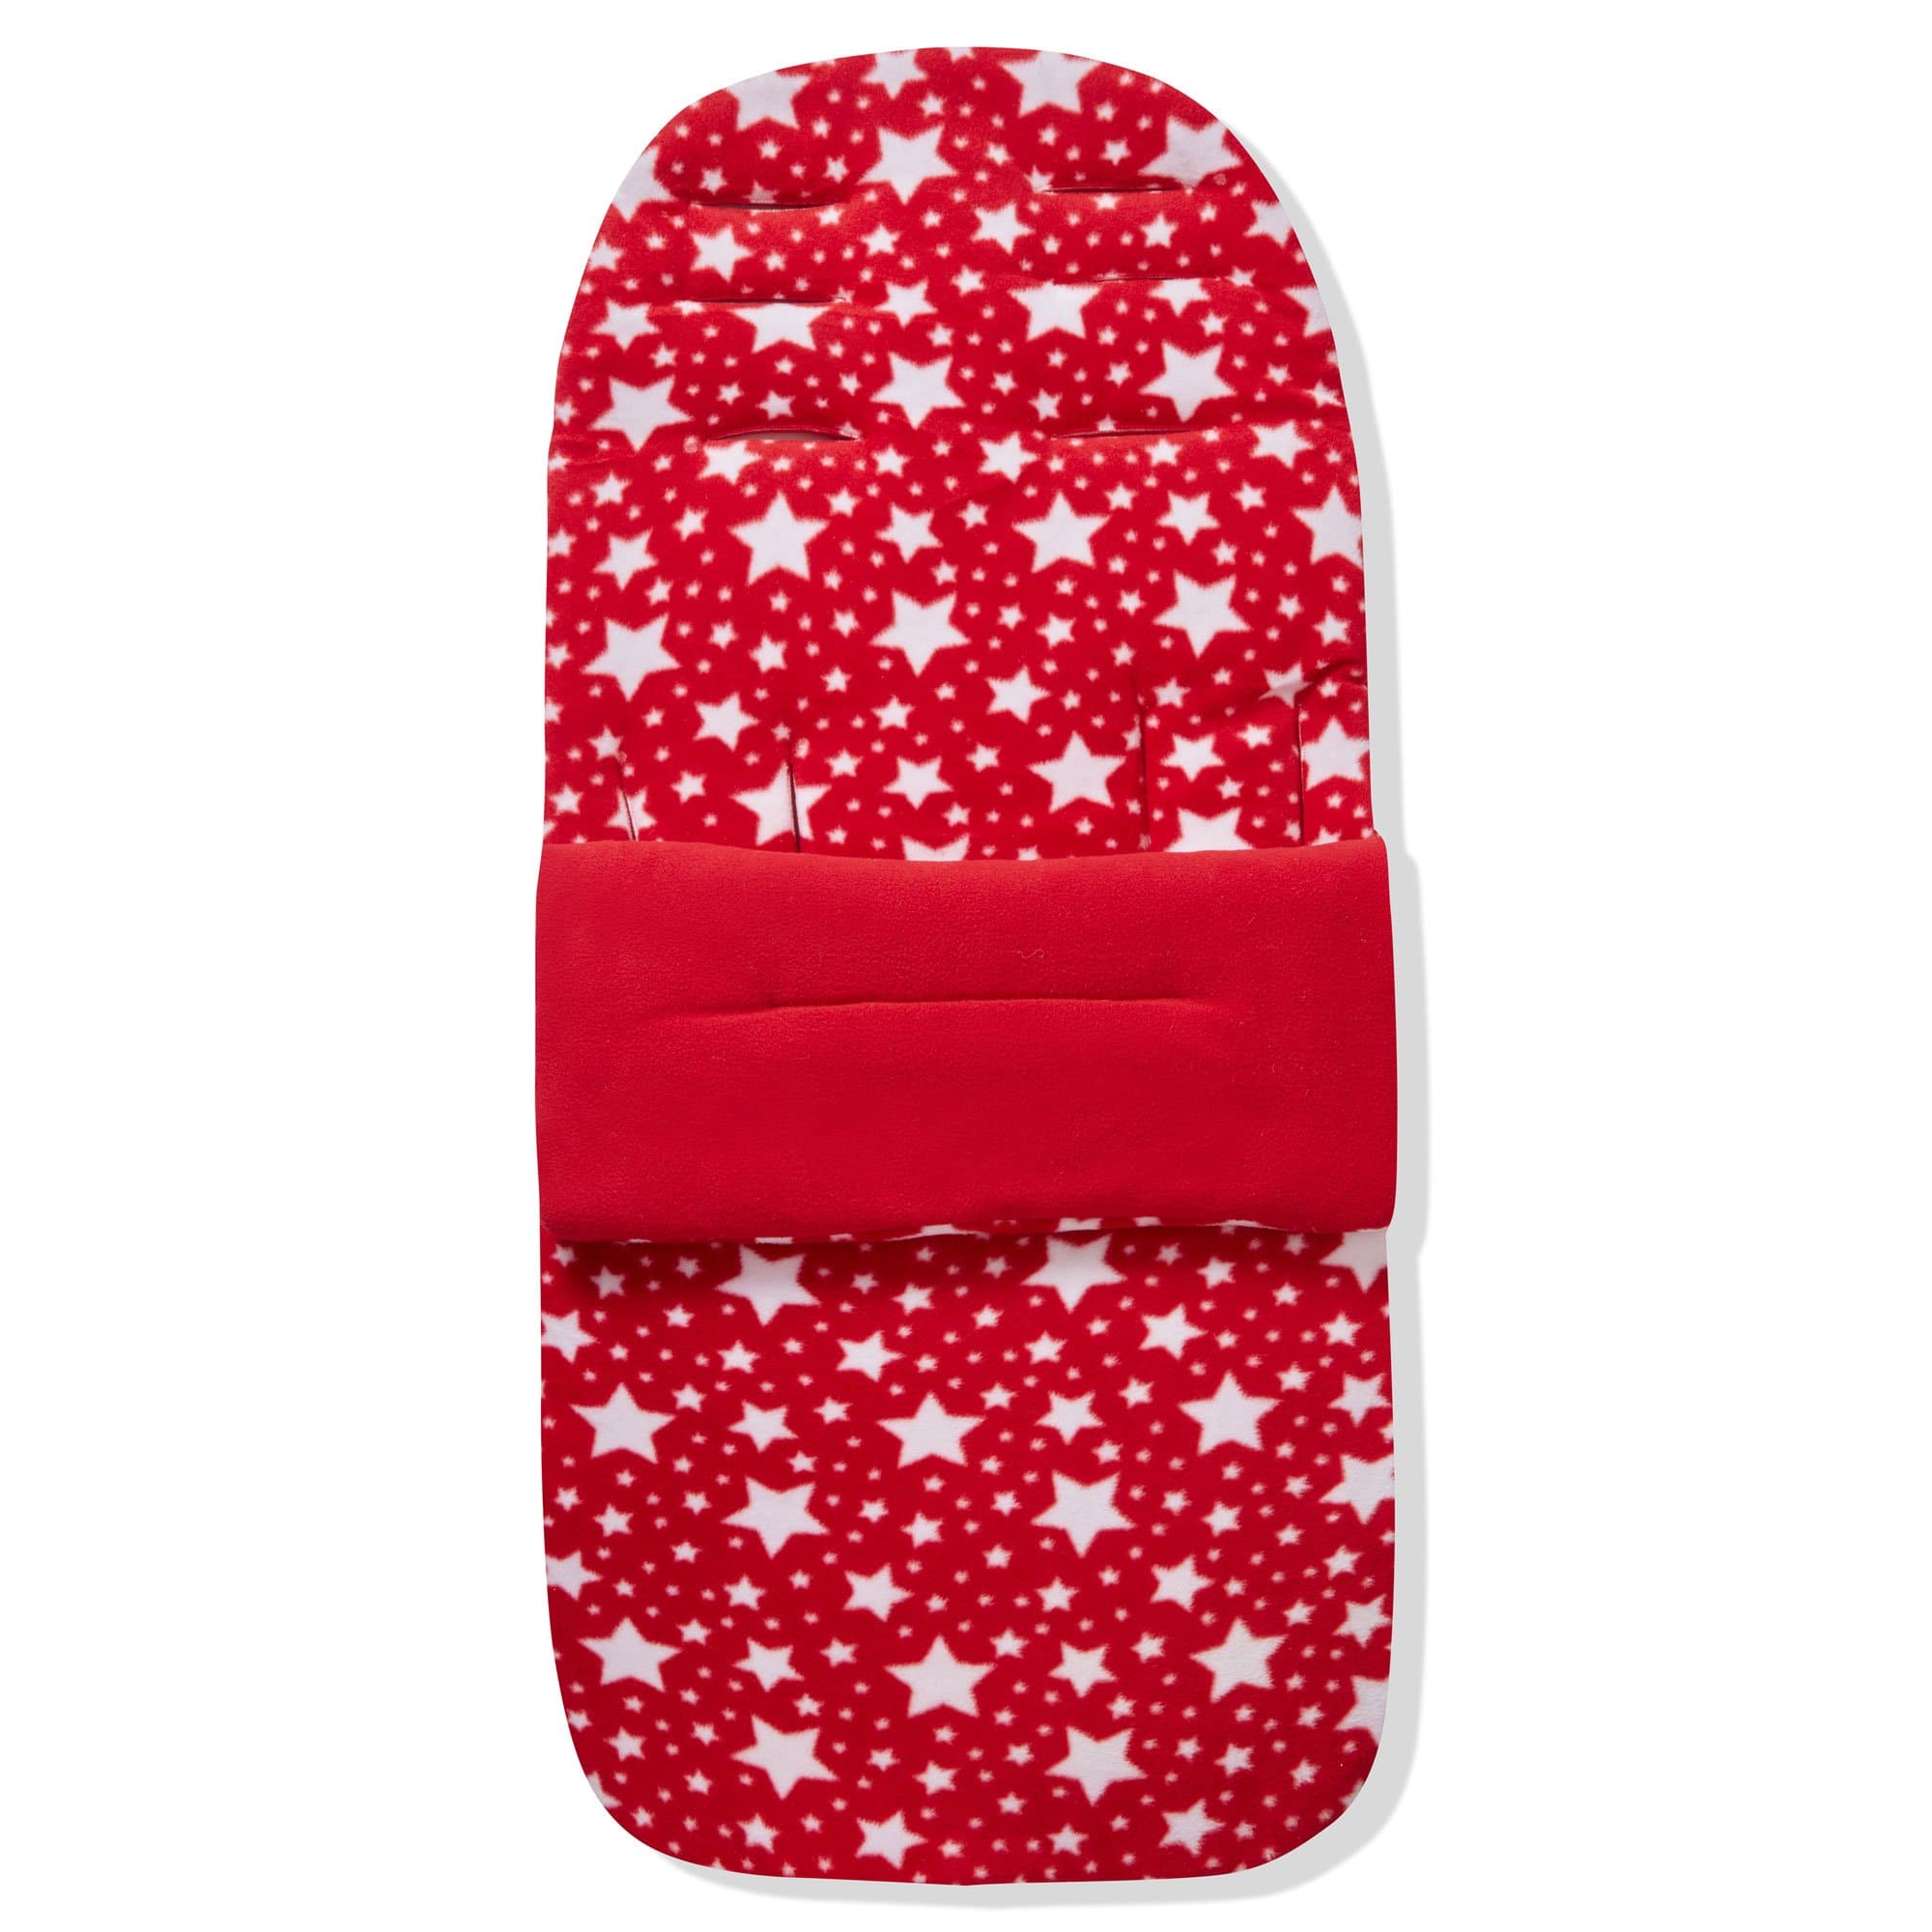 Fleece Footmuff / Cosy Toes Compatible with Urban Detour - For Your Little One